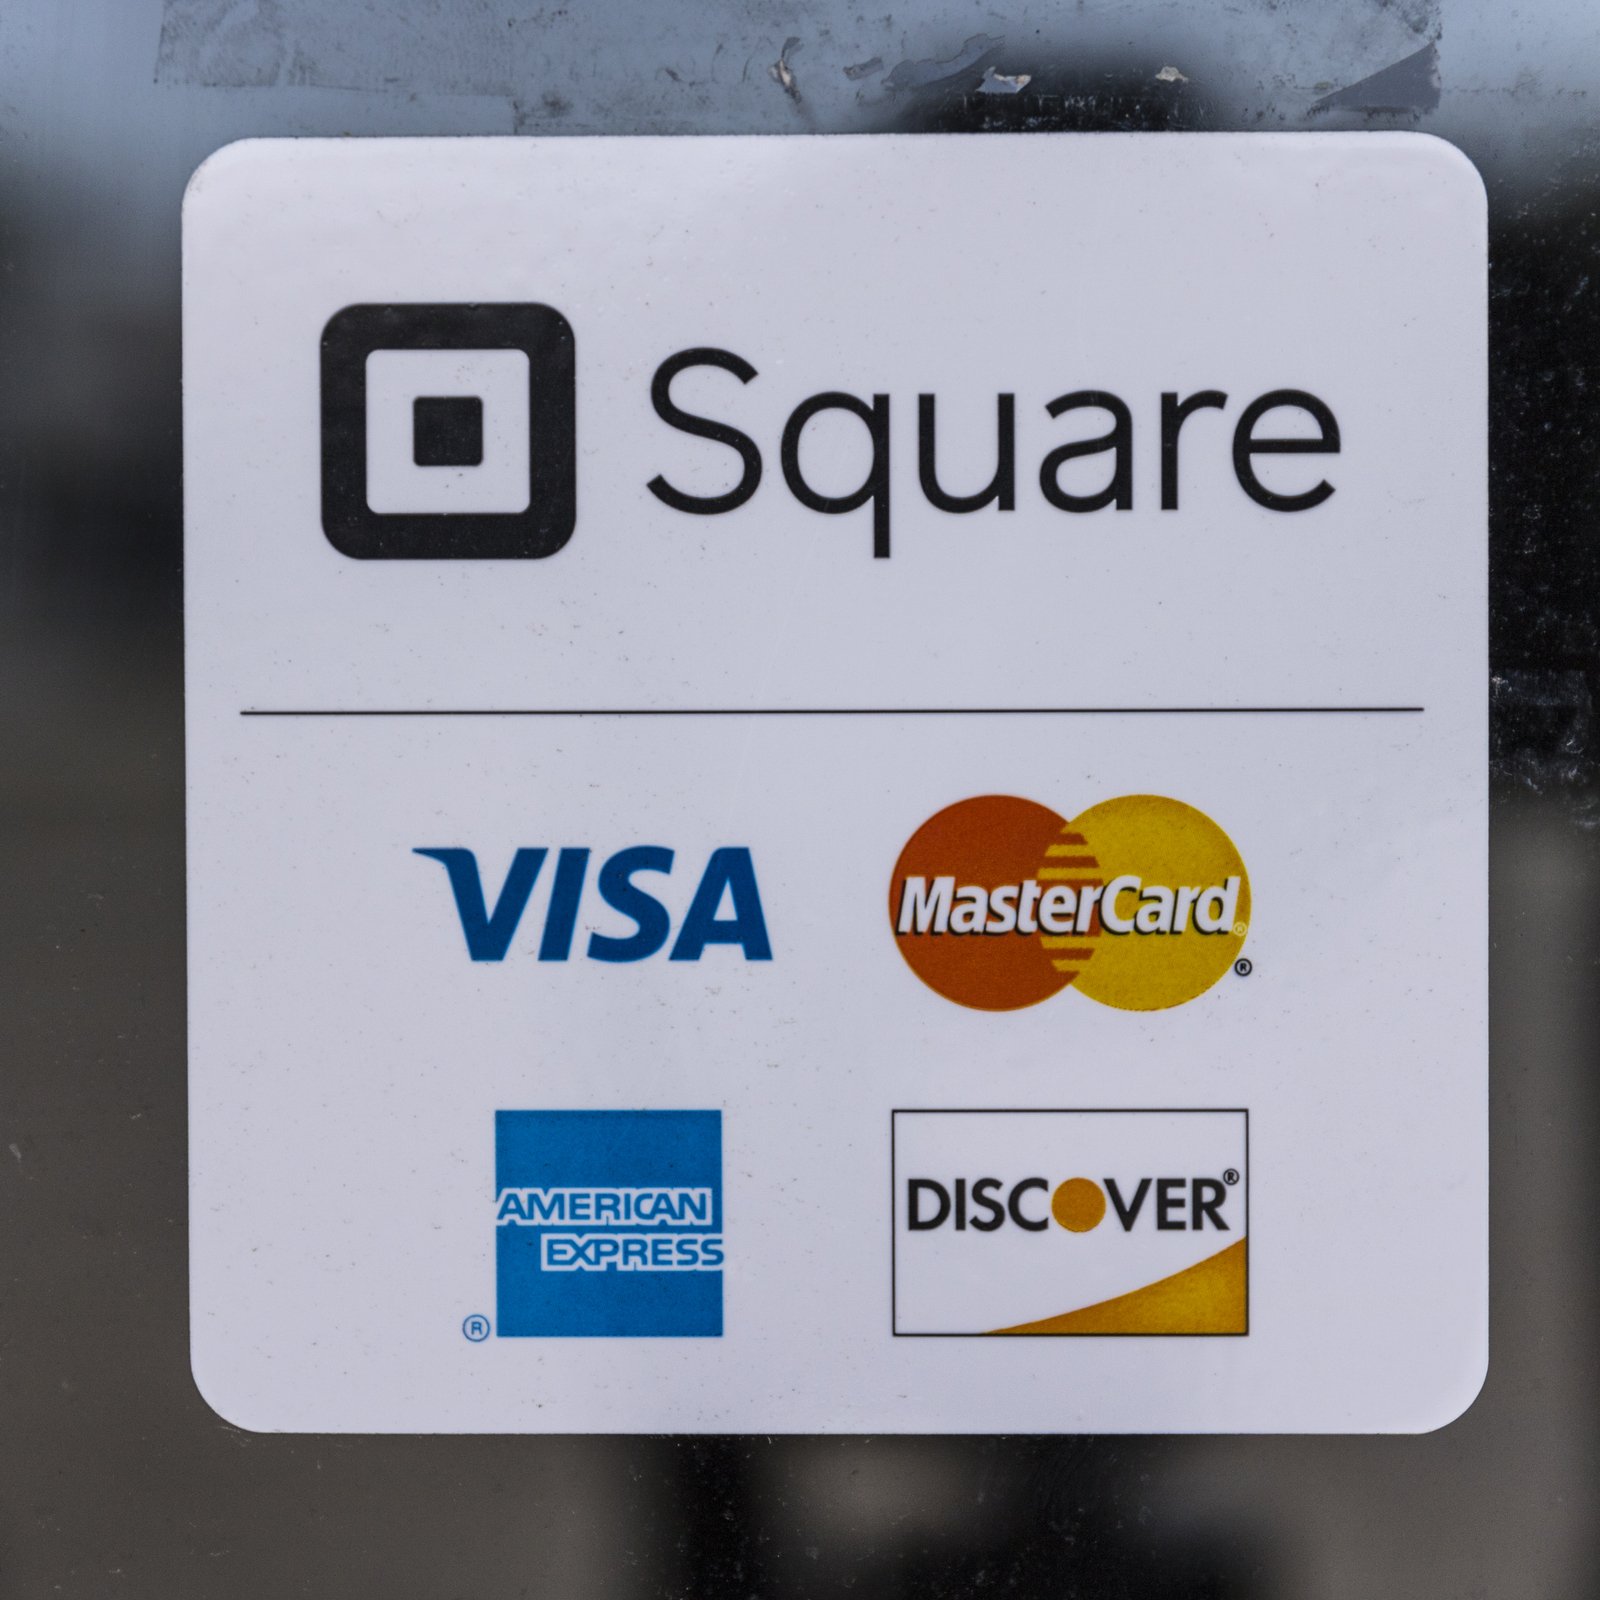 Square Cash Stock Spikes Due to Analyst’s Bitcoin Trading Optimism